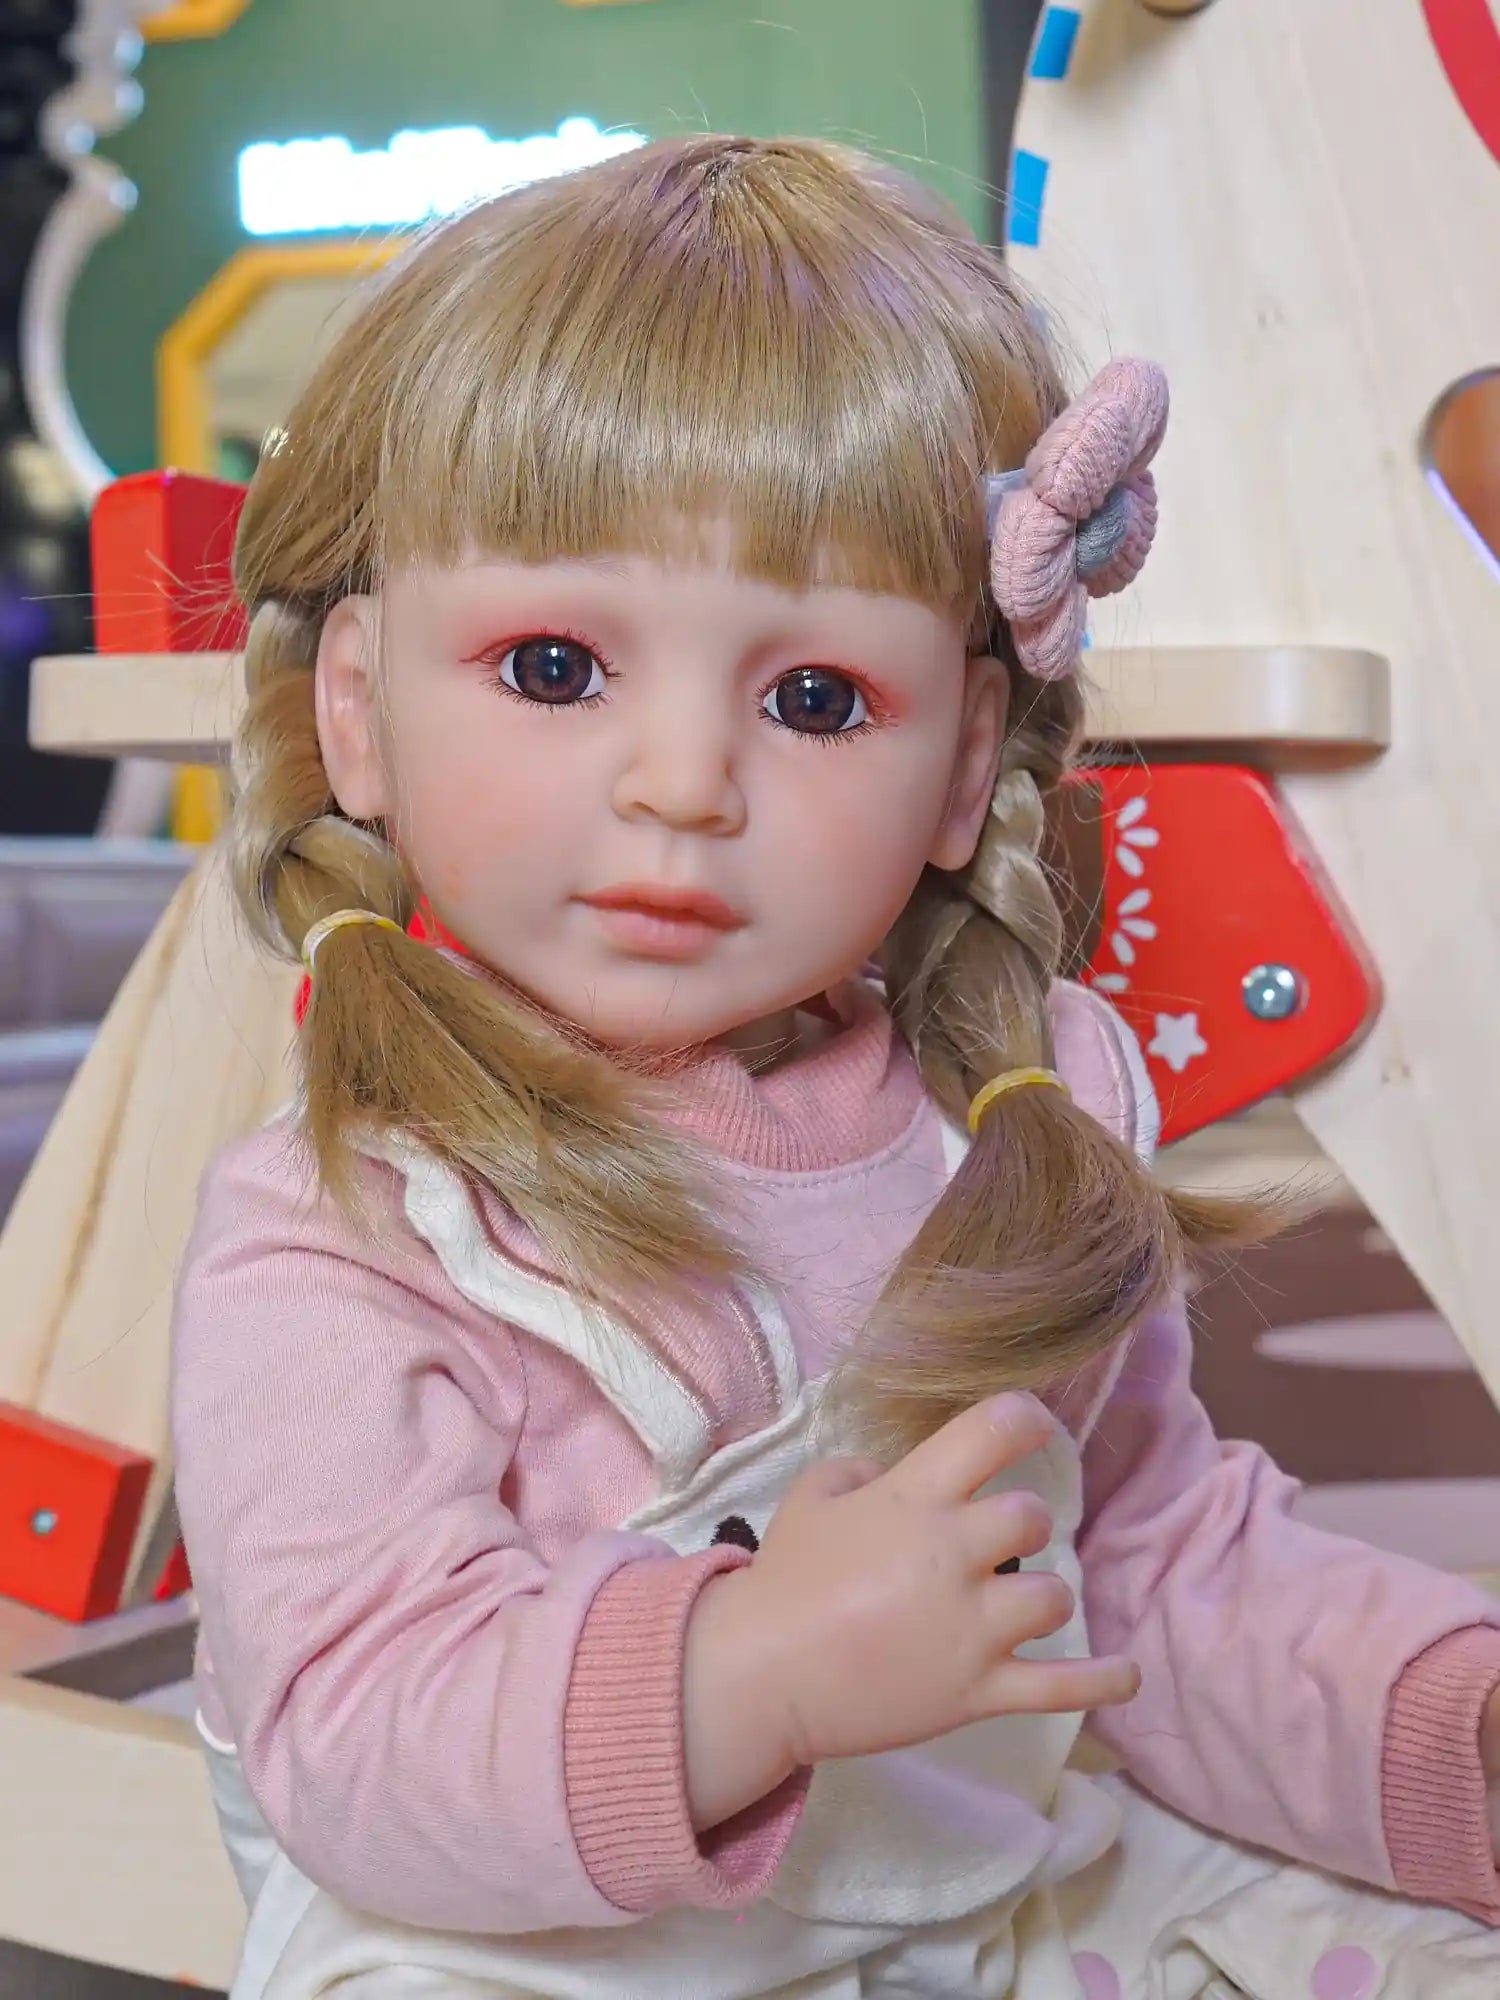 Toddler doll in a seated pose, donning a pink top, white bear overalls, looking contemplative, with wooden toys in the background.